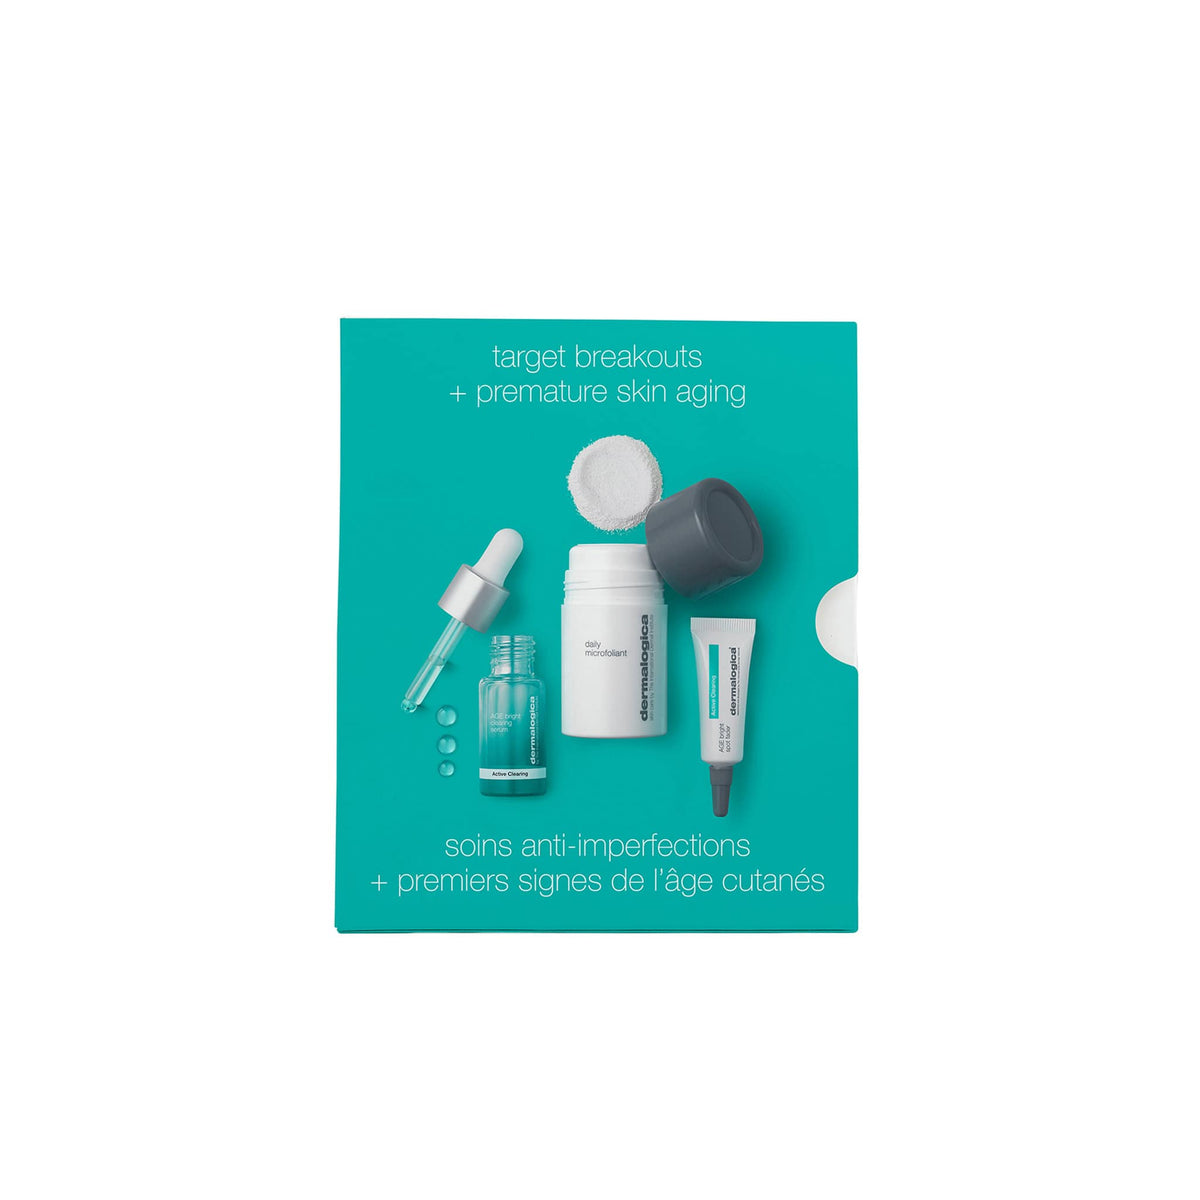 Dermalogica Active Clearing Kit